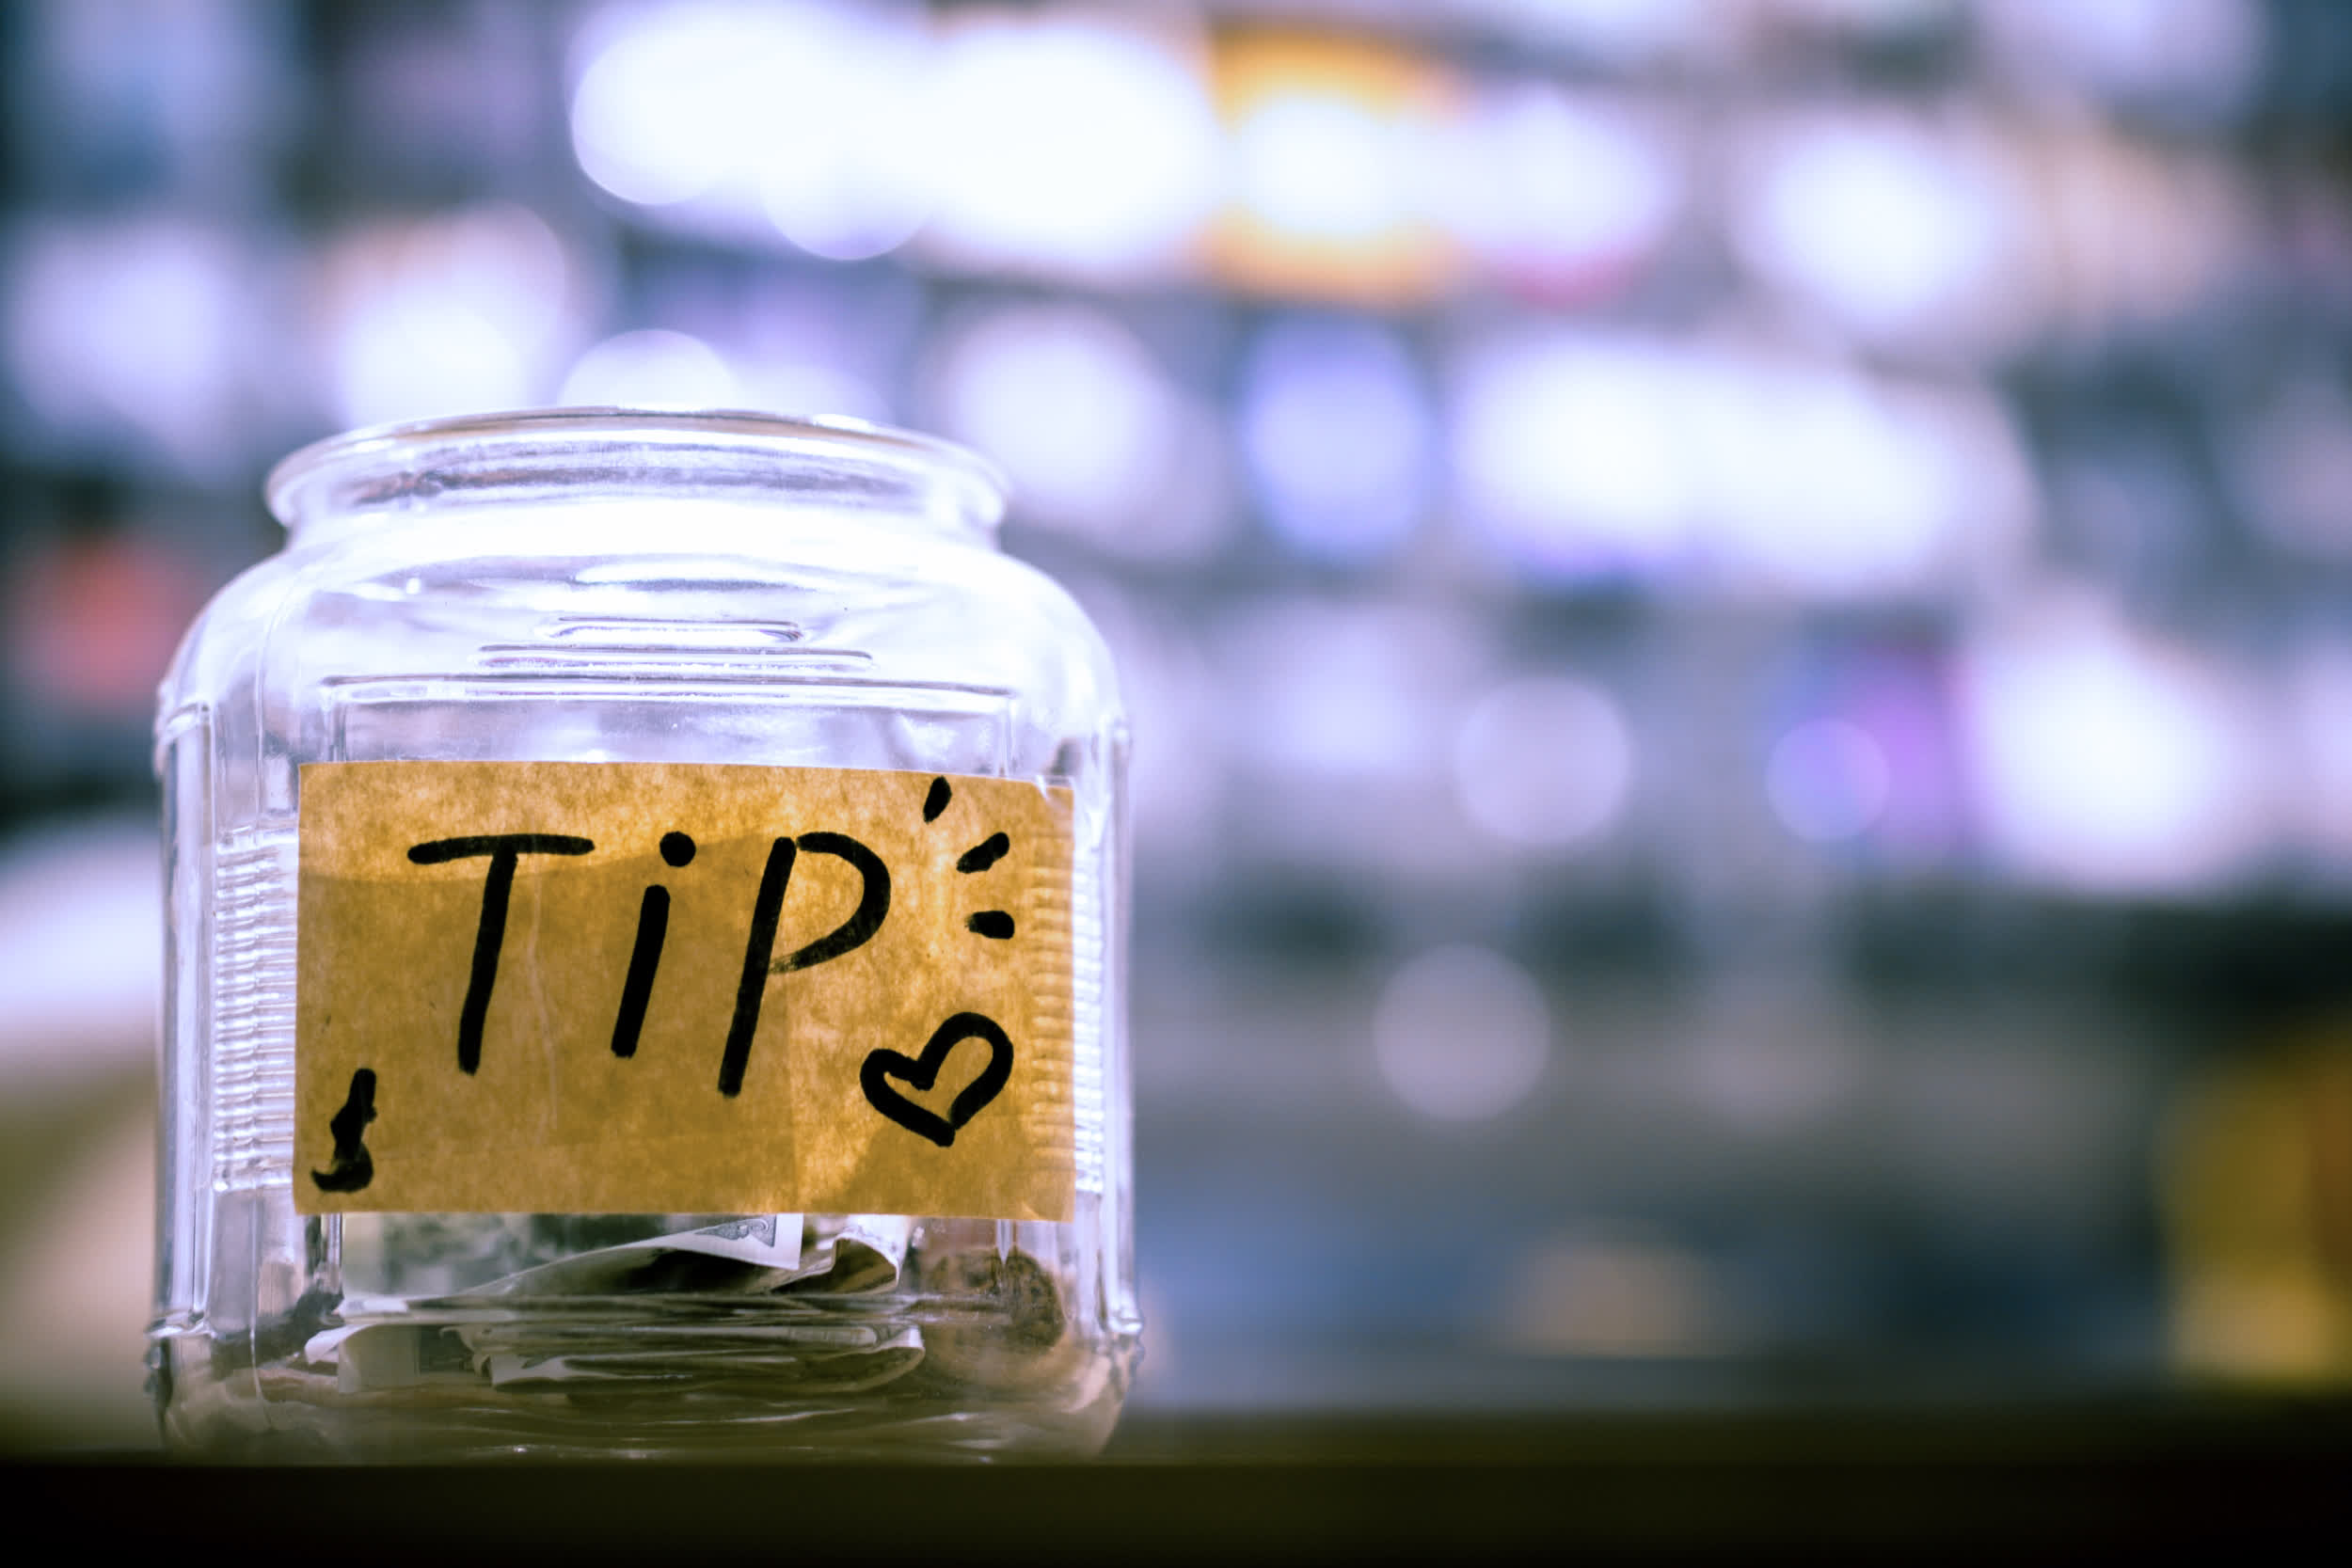 Twitter joins the cryptoverse by allowing users to tip Bitcoin to others